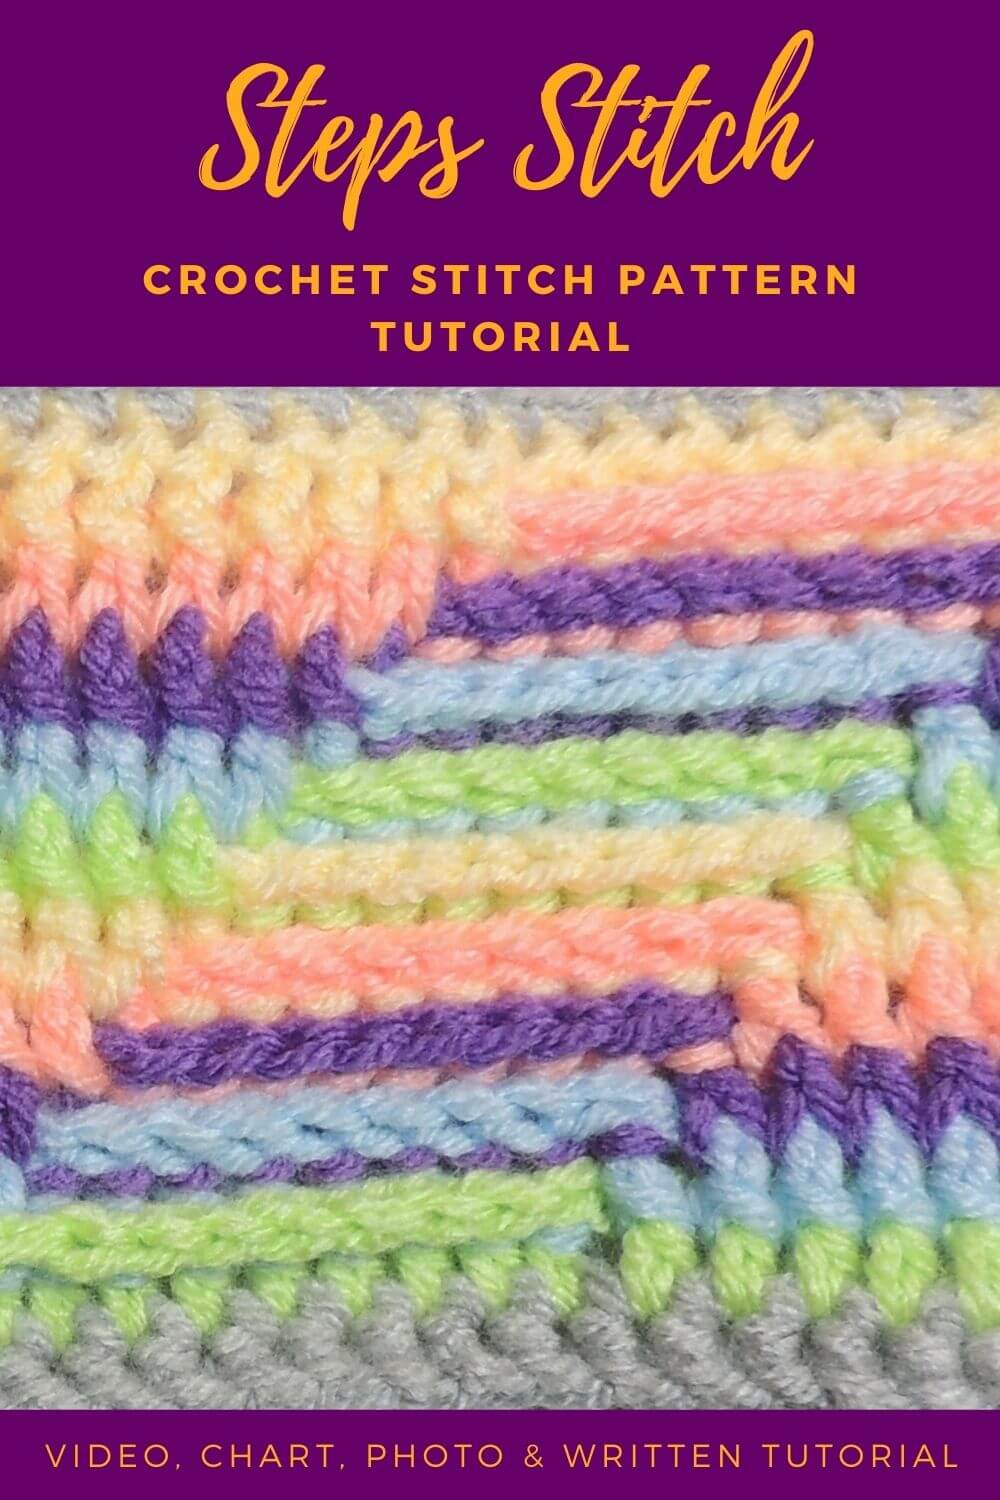 Step Up Your Crochet - Steps Stitch free tutorial